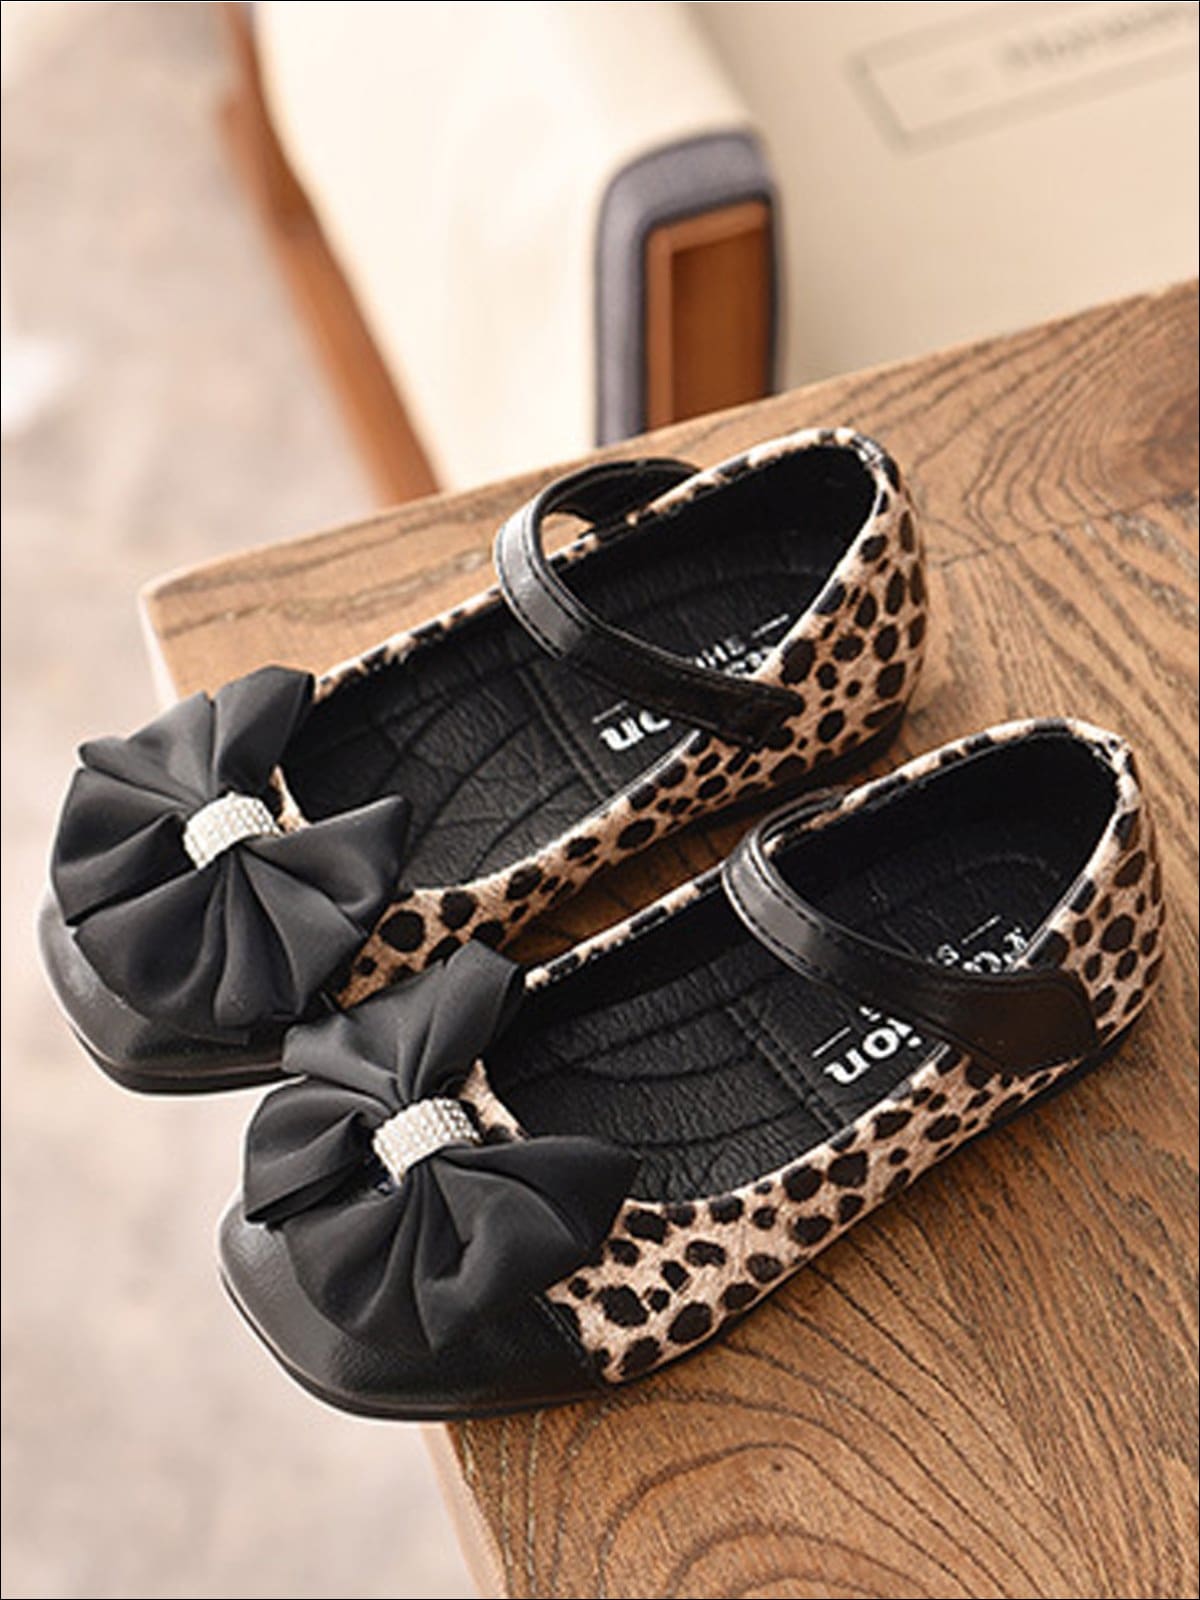 Girls Leather Animal Print Flats with Rhinestone and Bow Embellishments - Brown / 5 - Girls Flats